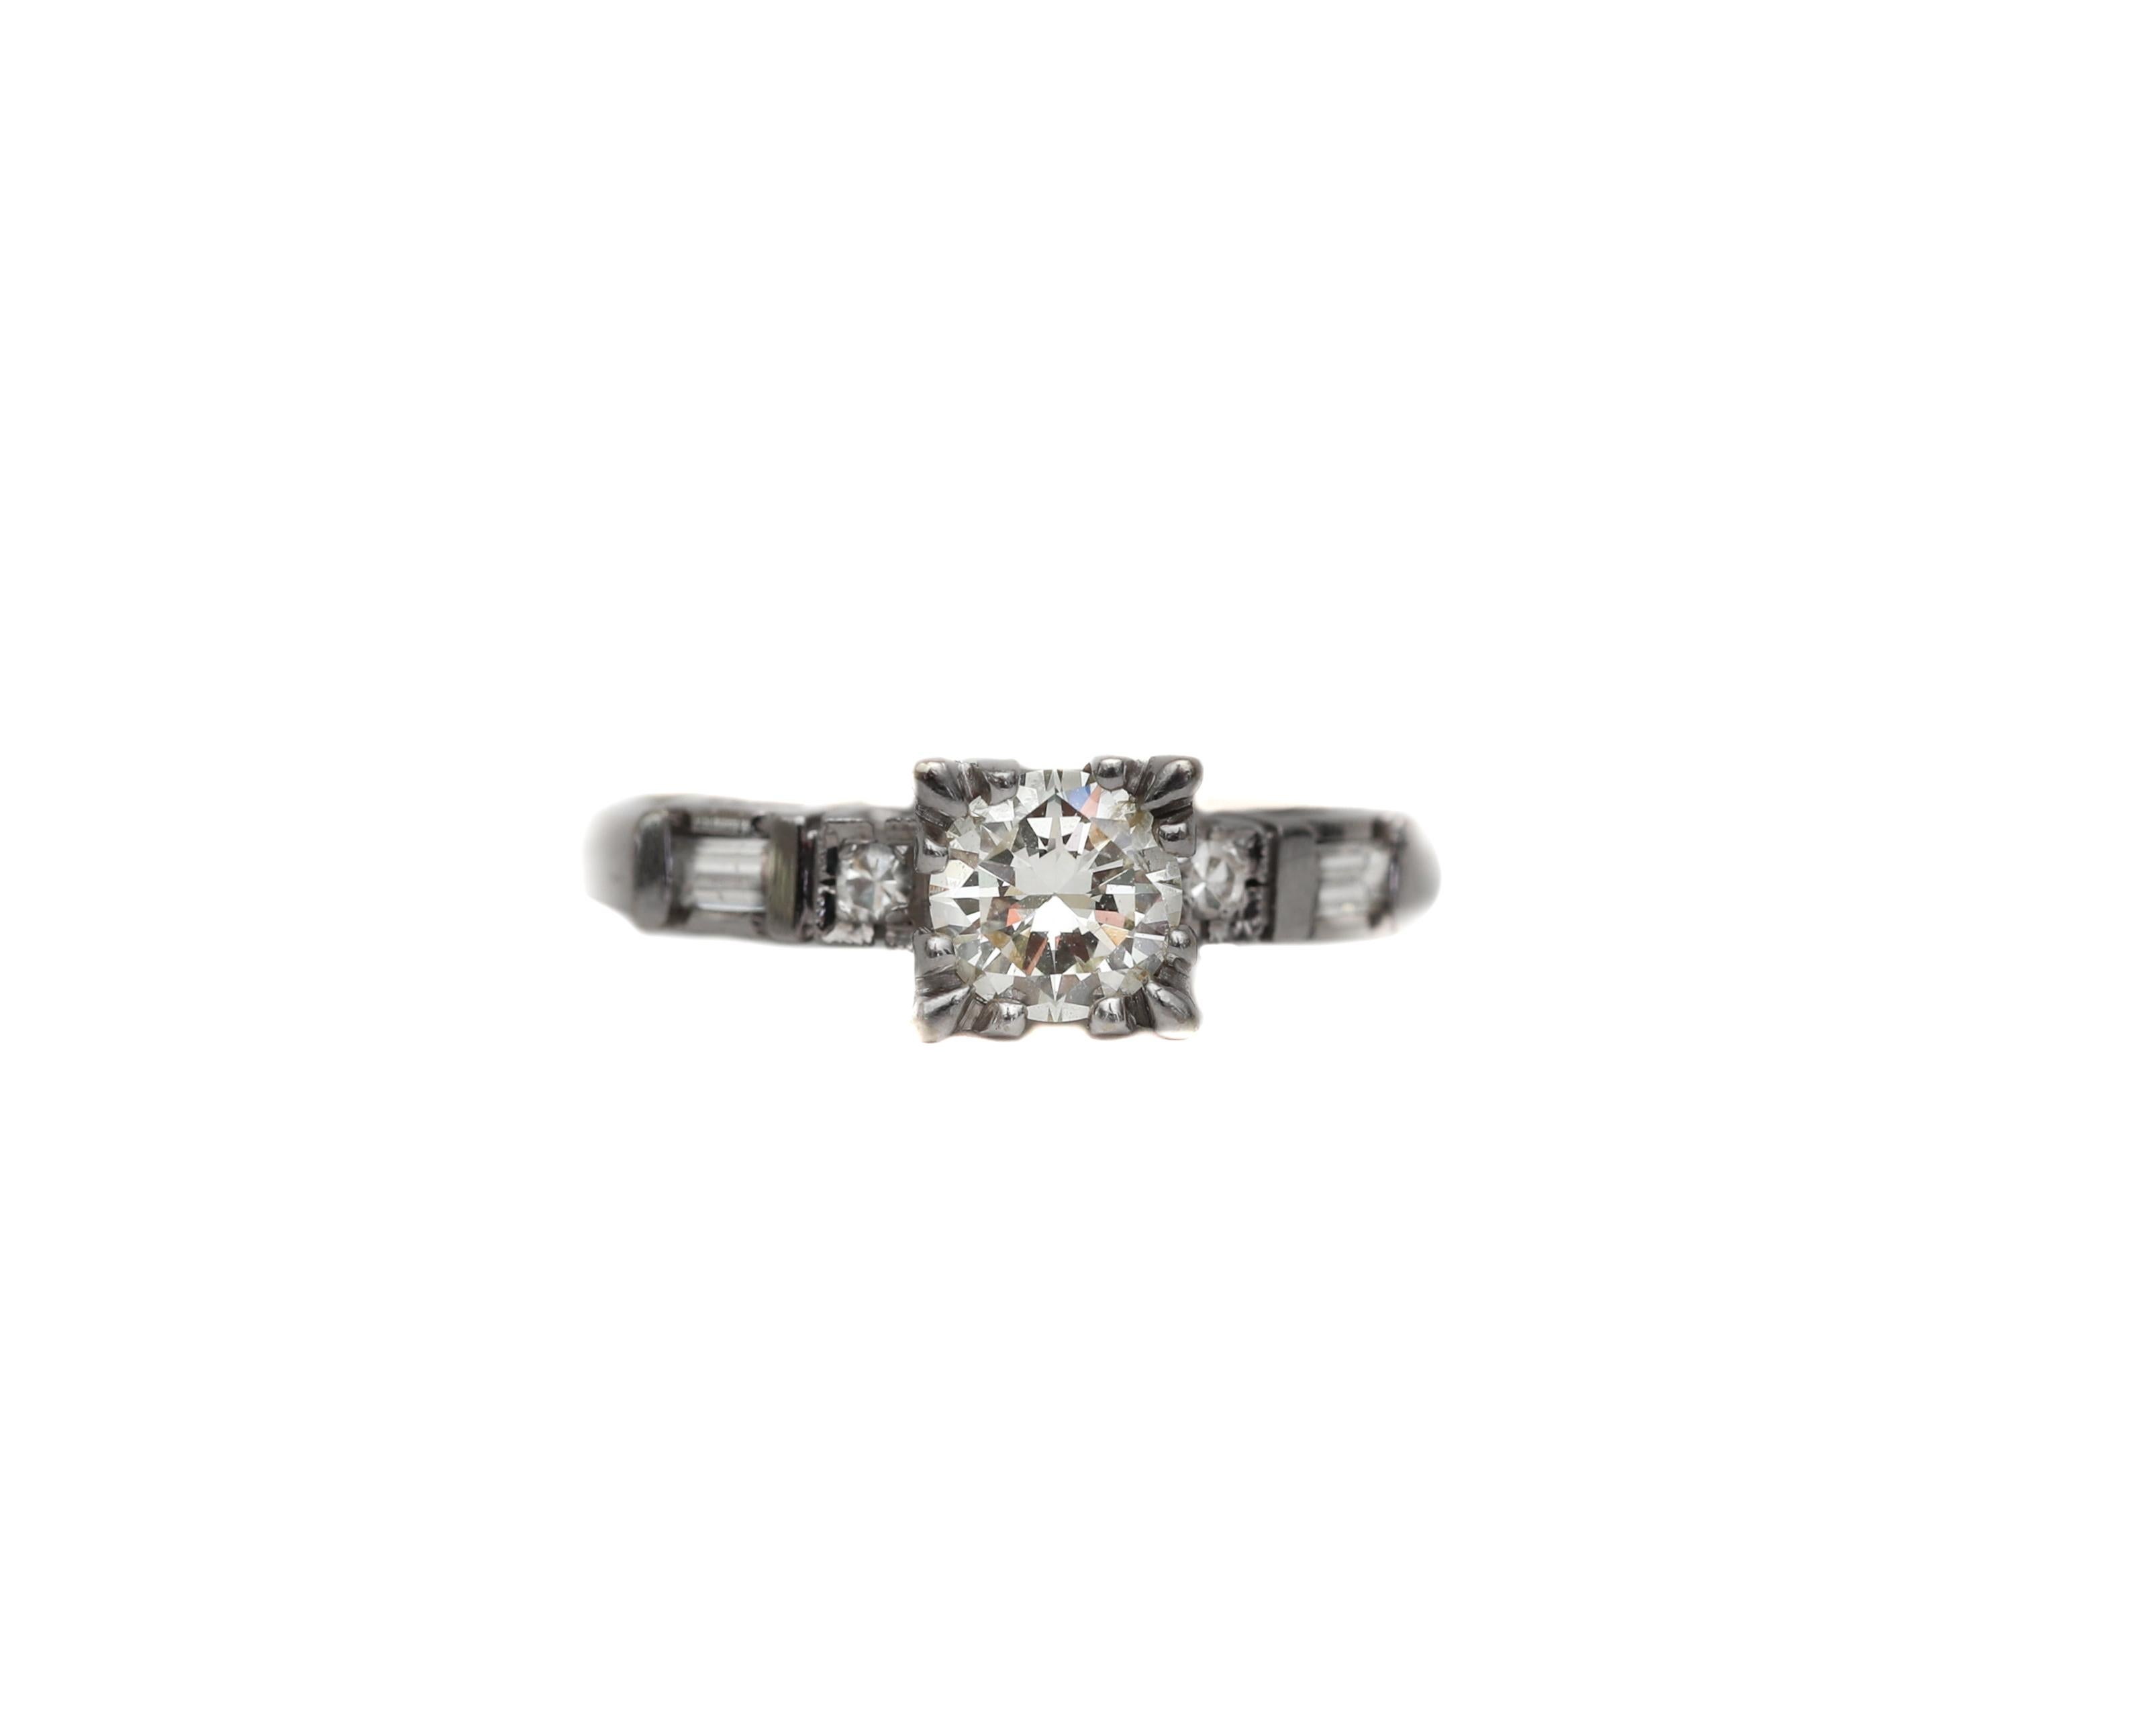 This classic diamond engagement ring features a lively .65 carat transition cut solitaire (in between early old european cuts and modern round brilliants) set in the center with squared head. Smaller round and baguette cut diamonds flank the center